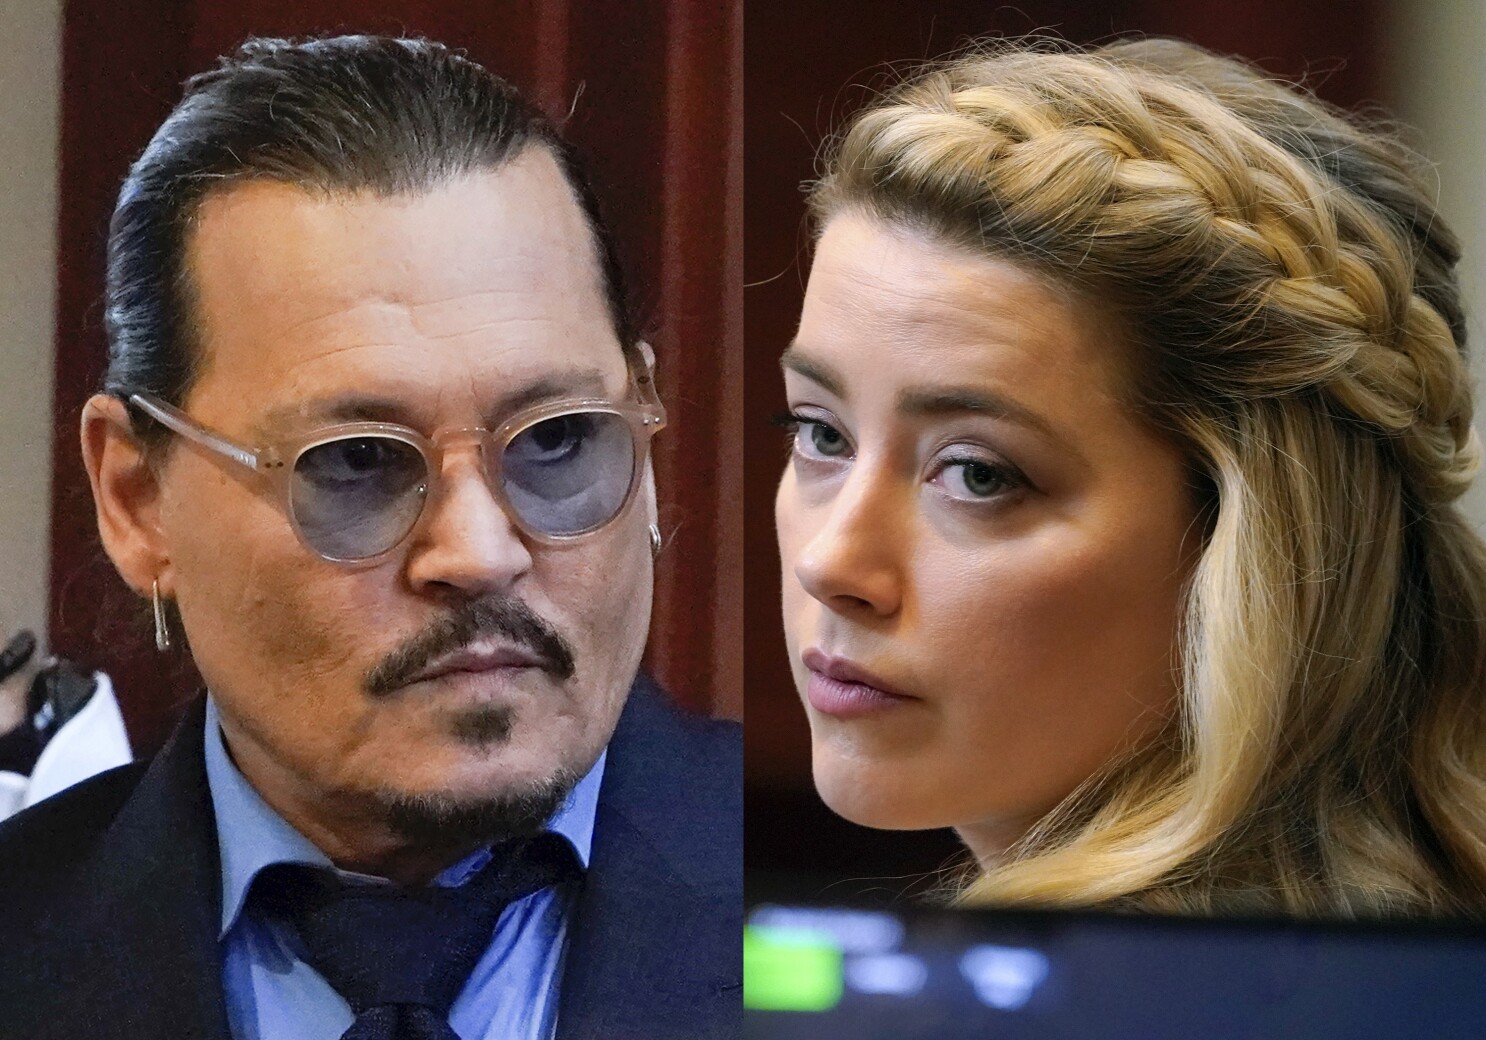 Amber Heard to appeal verdict after losing to Johnny Depp - Los Angeles Times